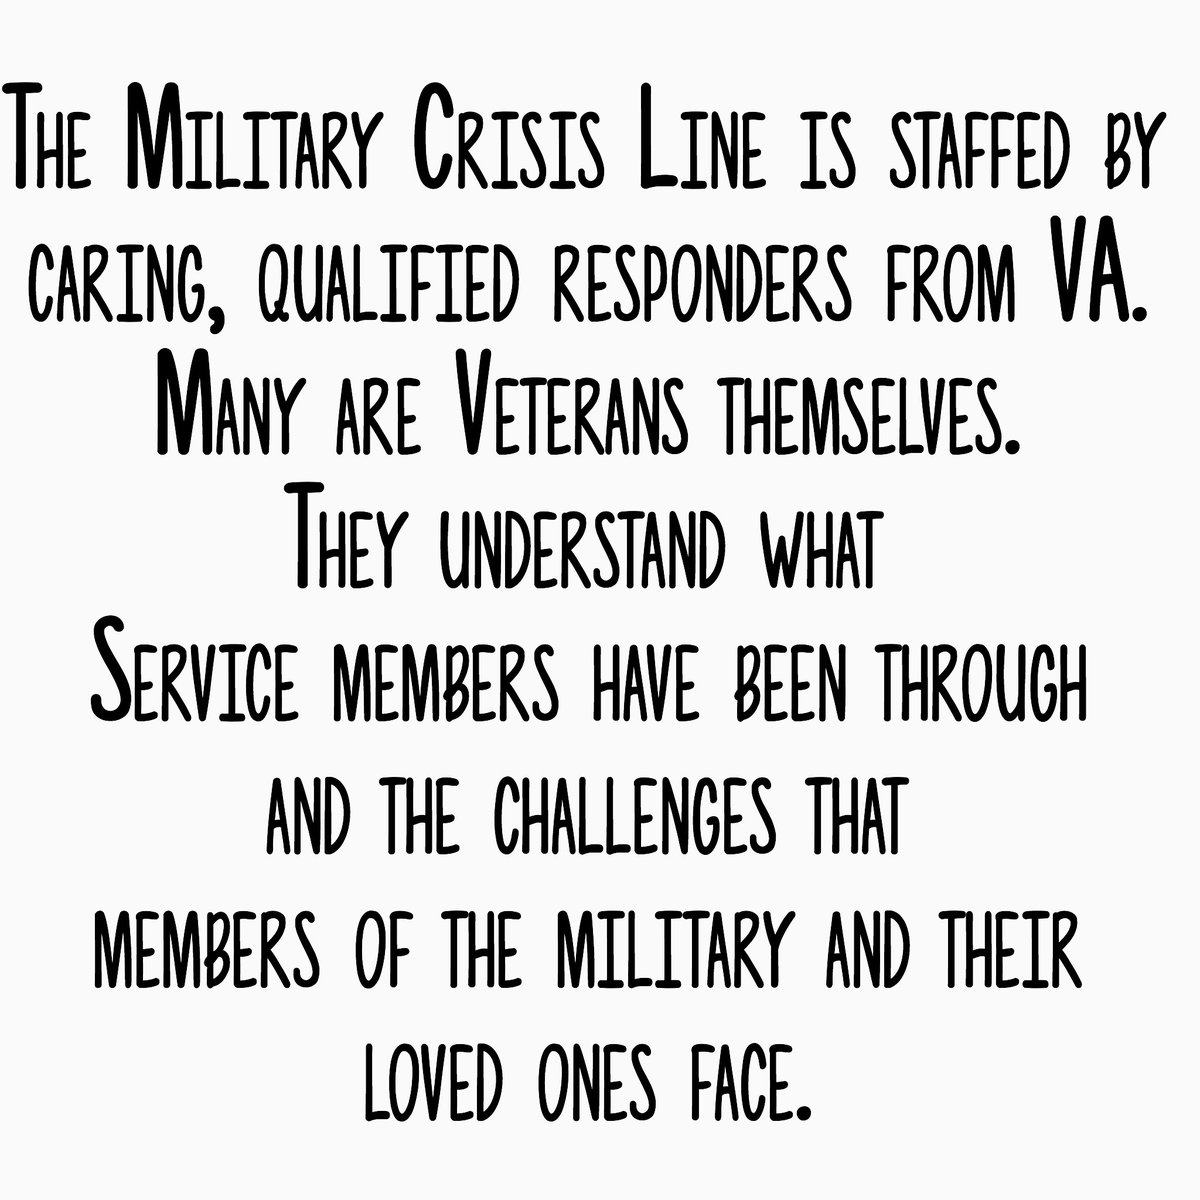 2/ We take care of our own.On average 18 Veterans commit suicide a day, one is too many. It's time to change the stigma. Please reach out for help.Veteran Crisis LineUS 800-273-8255Press 1Text 838255 UK 0800 138 1619Canada 18334564566